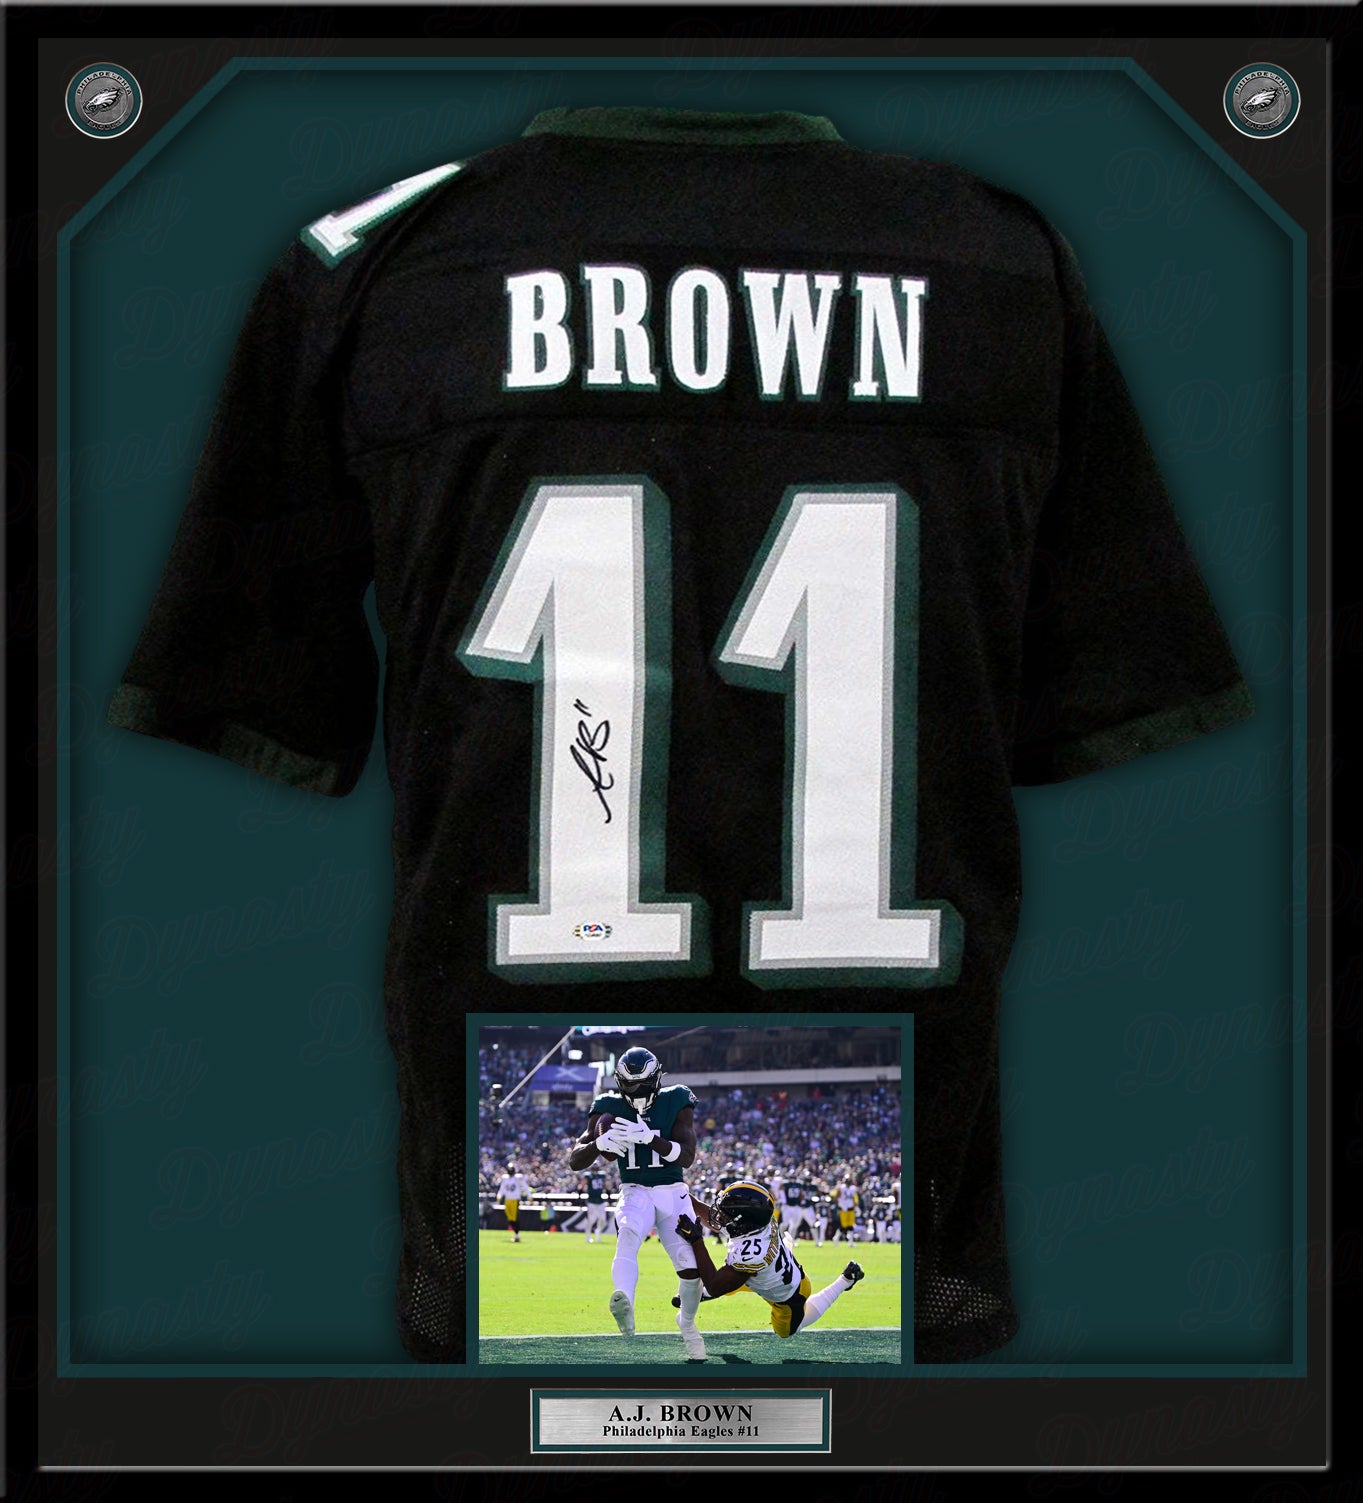 Jersey Framing NFL FOOTBALL Frame Your Autographed Signed Jerseys